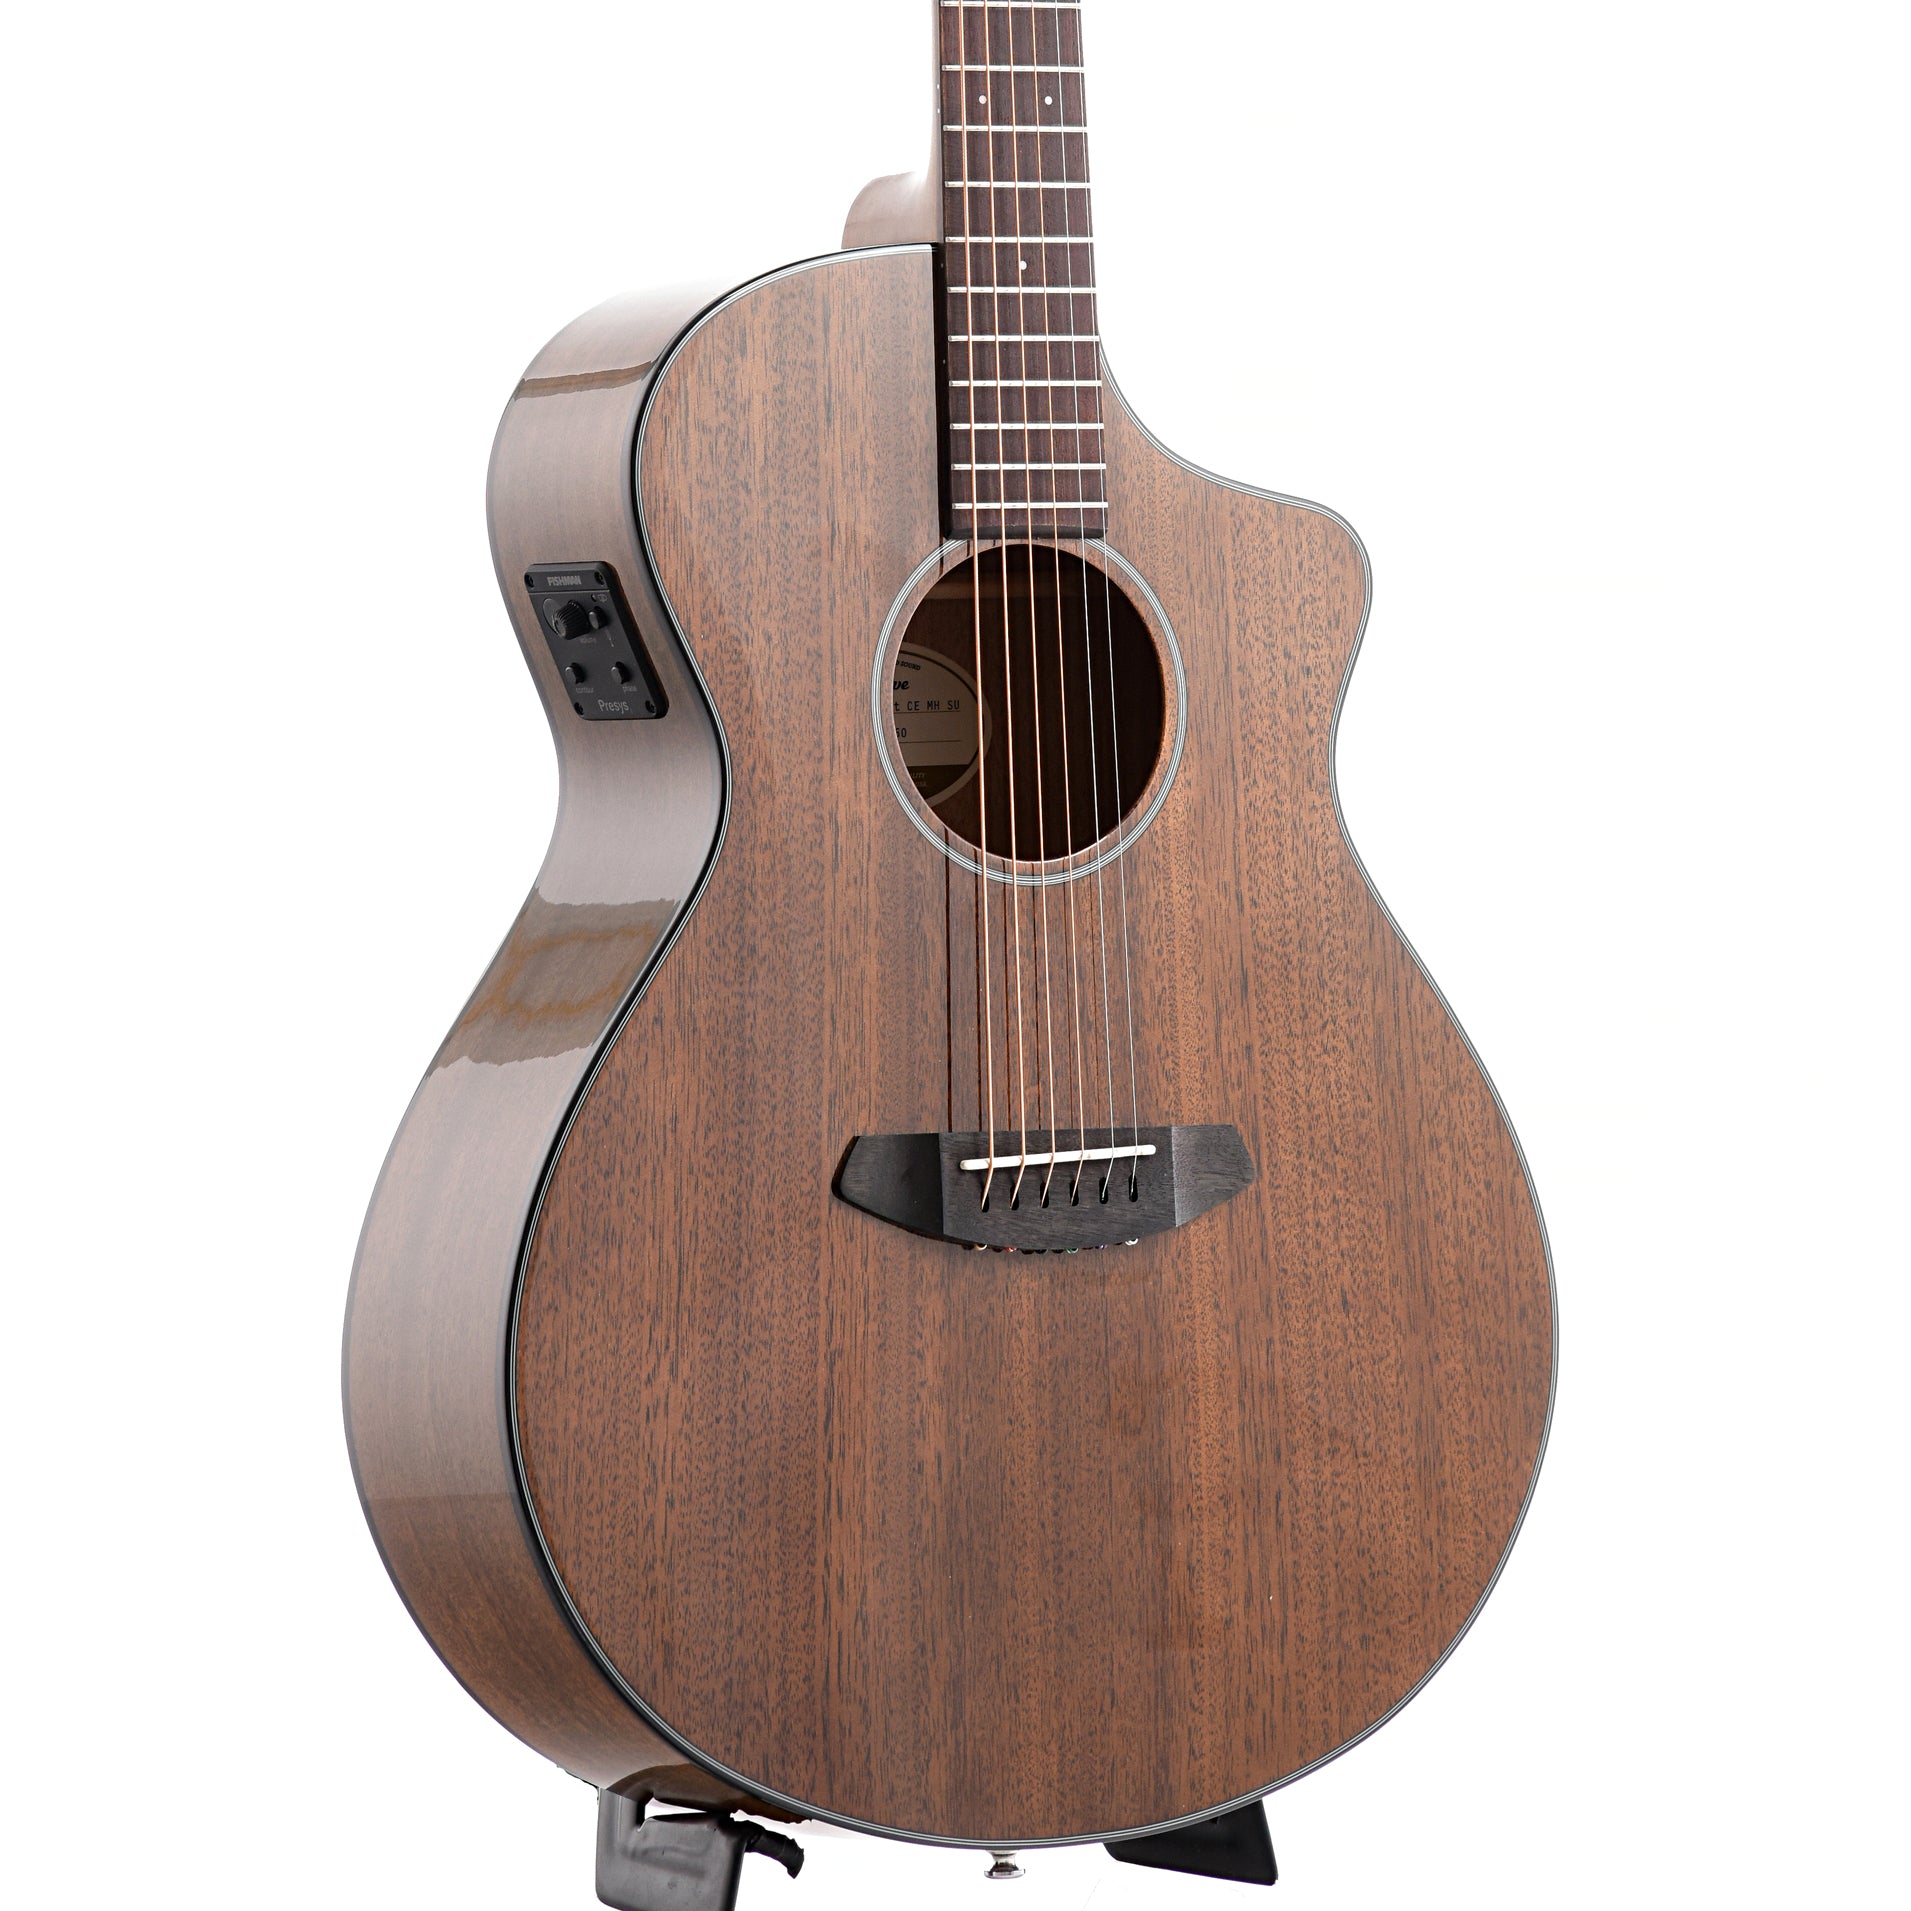 Image 3 of Breedlove Discovery Concert Suede CE Mahogany-Mahogany Acoustic Guitar - SKU# BDSUEDE : Product Type Flat-top Guitars : Elderly Instruments